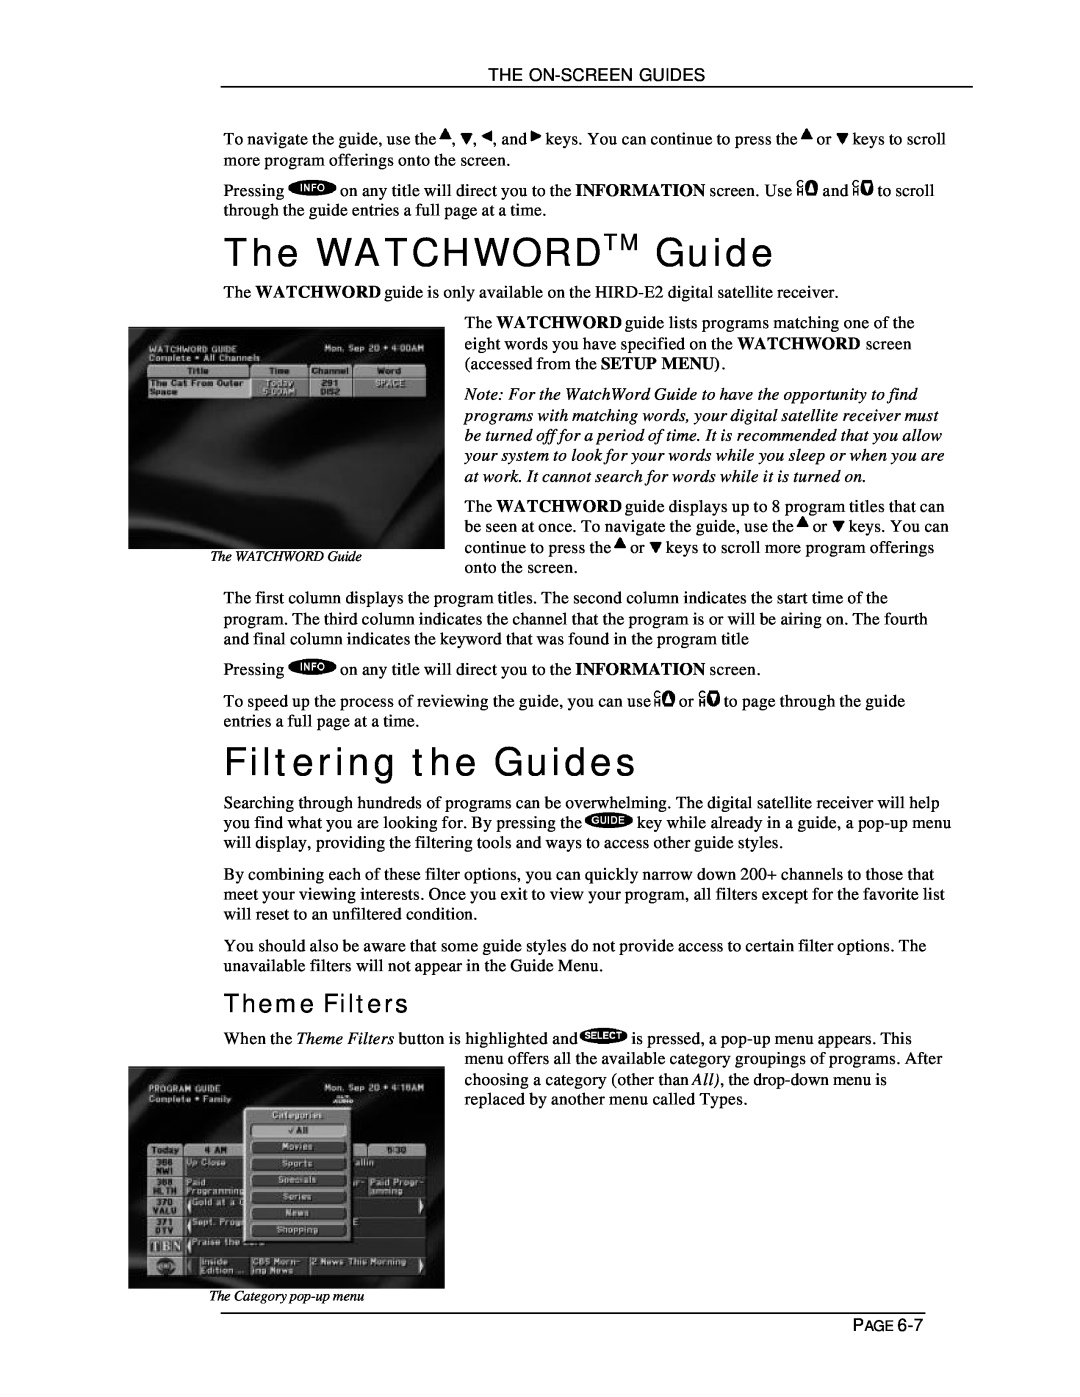 DirecTV HIRD-E11, HIRD-E25 owner manual The WATCHWORDTM Guide, Filtering the Guides, Theme Filters 